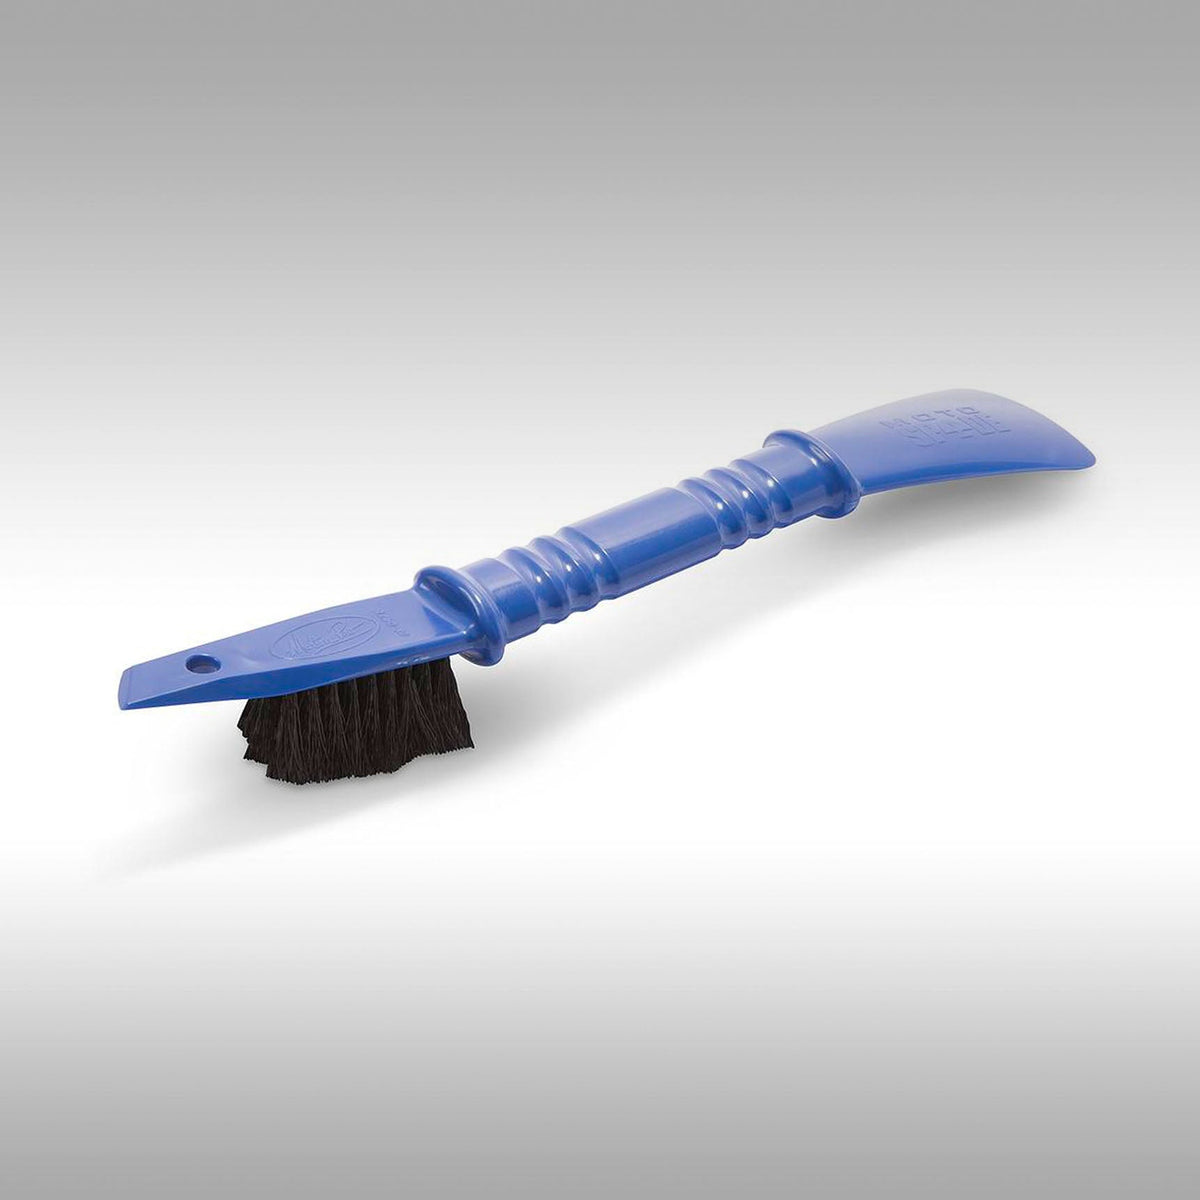 The Motion Pro Moto Spade is a great way to get the excess, caked on mud scraped off your bike to make cleaning your bike properly more efficient. Stiff plastic scraper on one end limits scrating and surface damage while the brush will get into all the tight spots. 